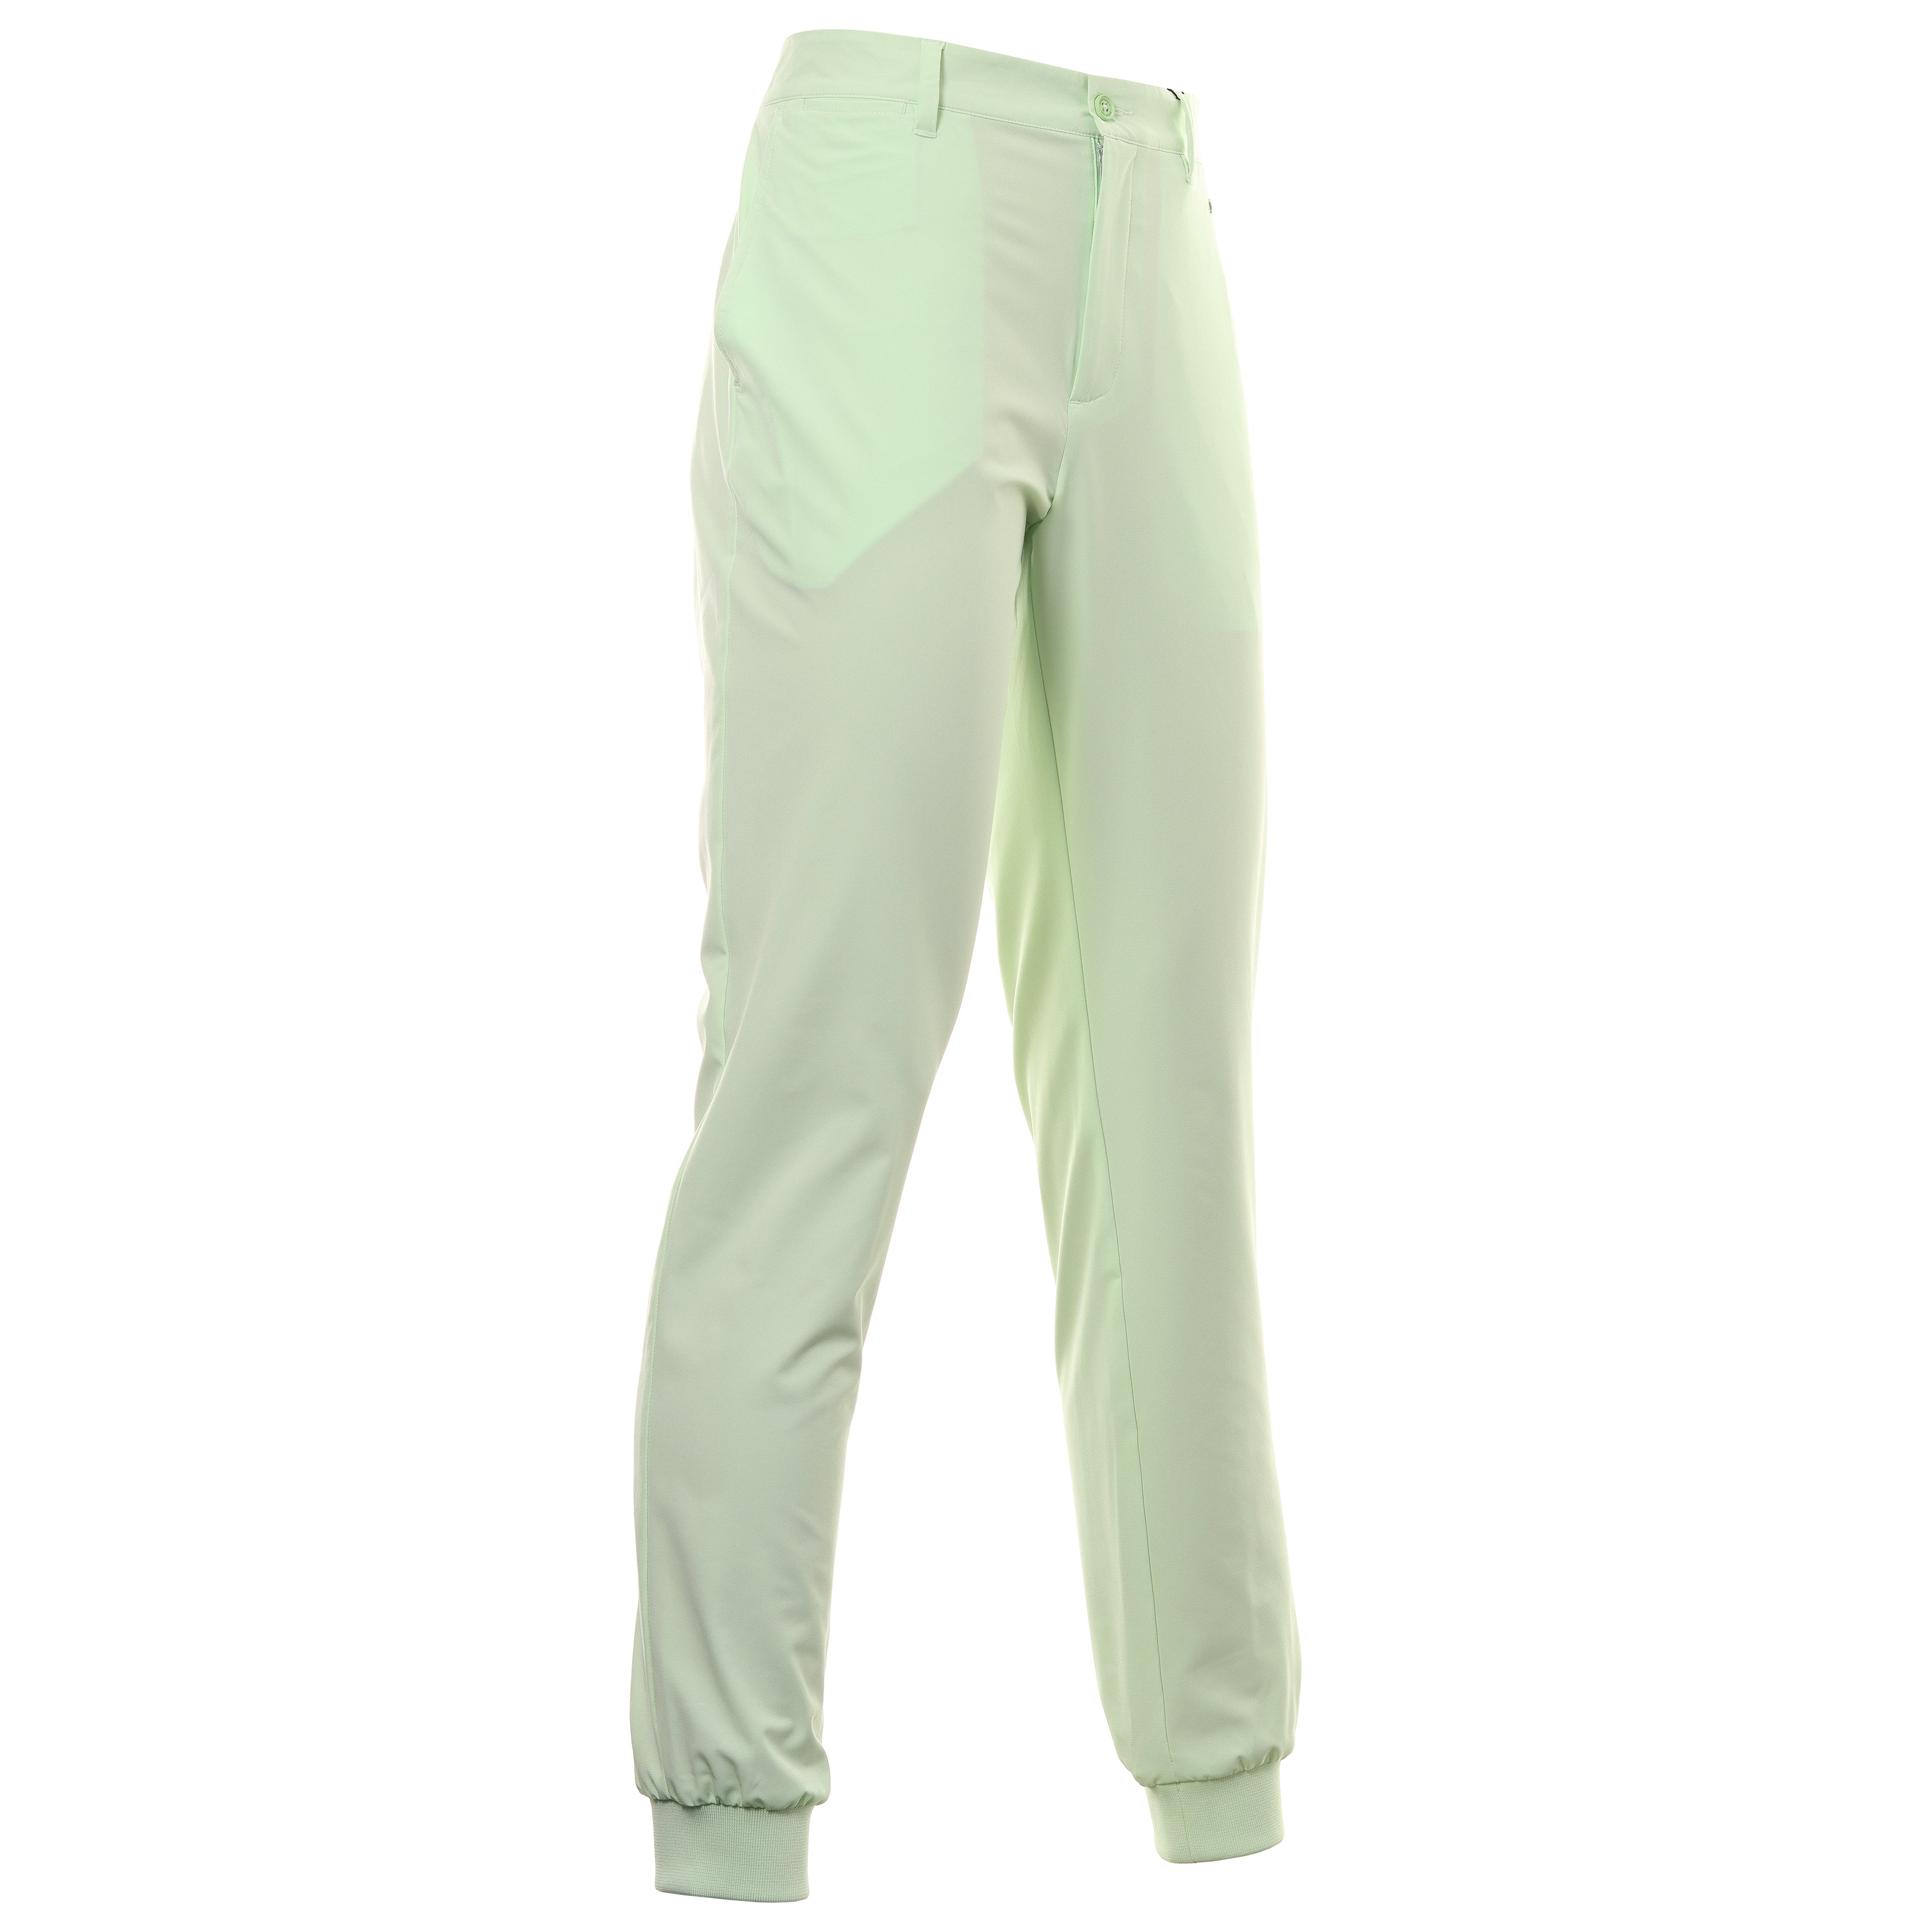 J.Lindeberg Athleisure Trousers - Alpha Jogger Pant - Thyme Green